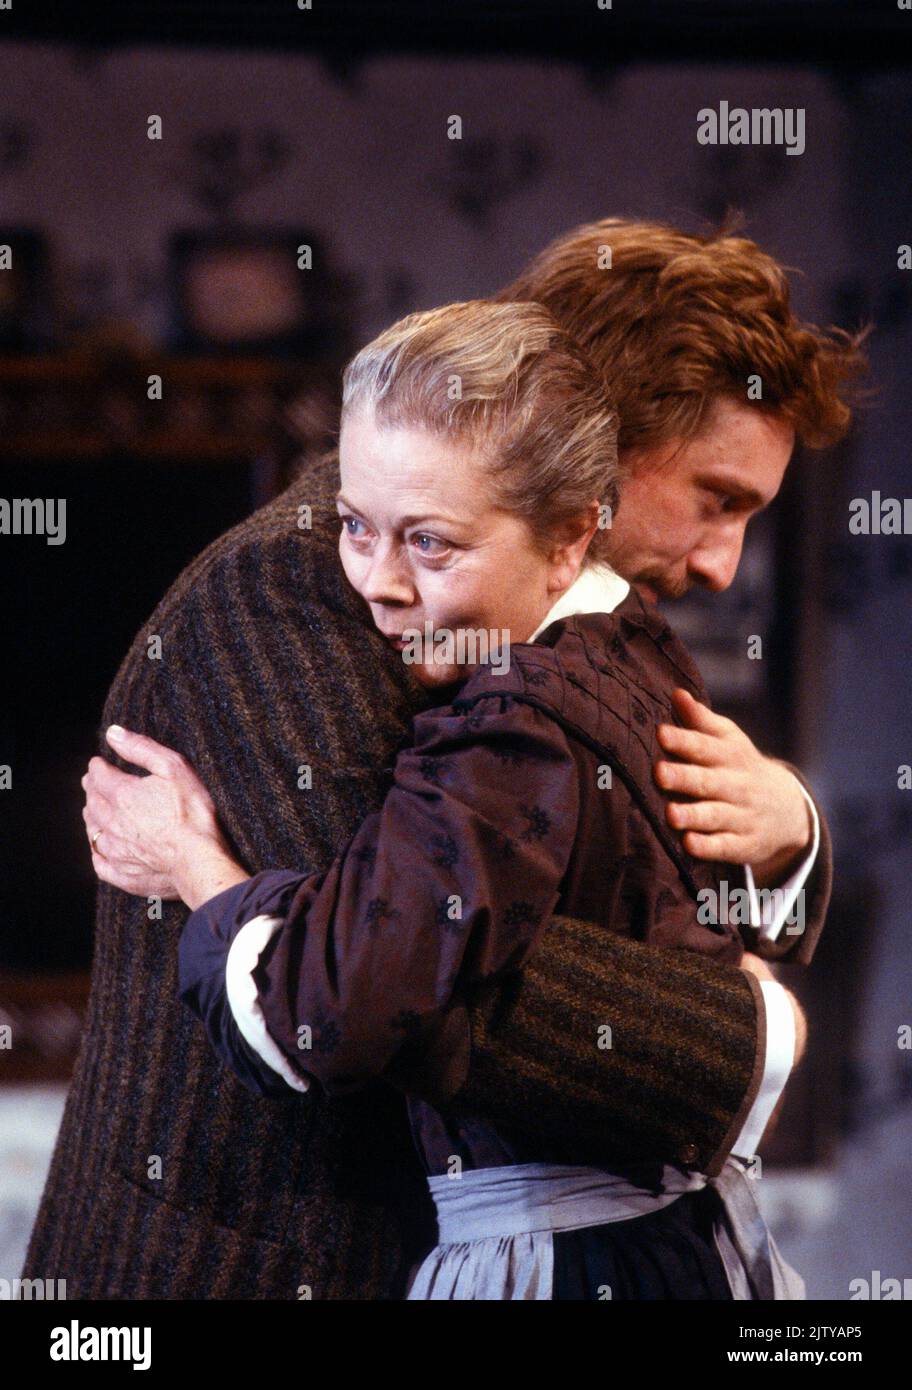 Annette Crosbie (Mrs Lambert), Neil Dudgeon (Ernest Lambert) in A COLLIER'S FRIDAY NIGHT by D.H. Lawrence at the  Greenwich Theatre, London SE10 26/10/1987  design: Kenny Miller  lighting: Gerry Jenkinson  director: John Dove Stock Photo